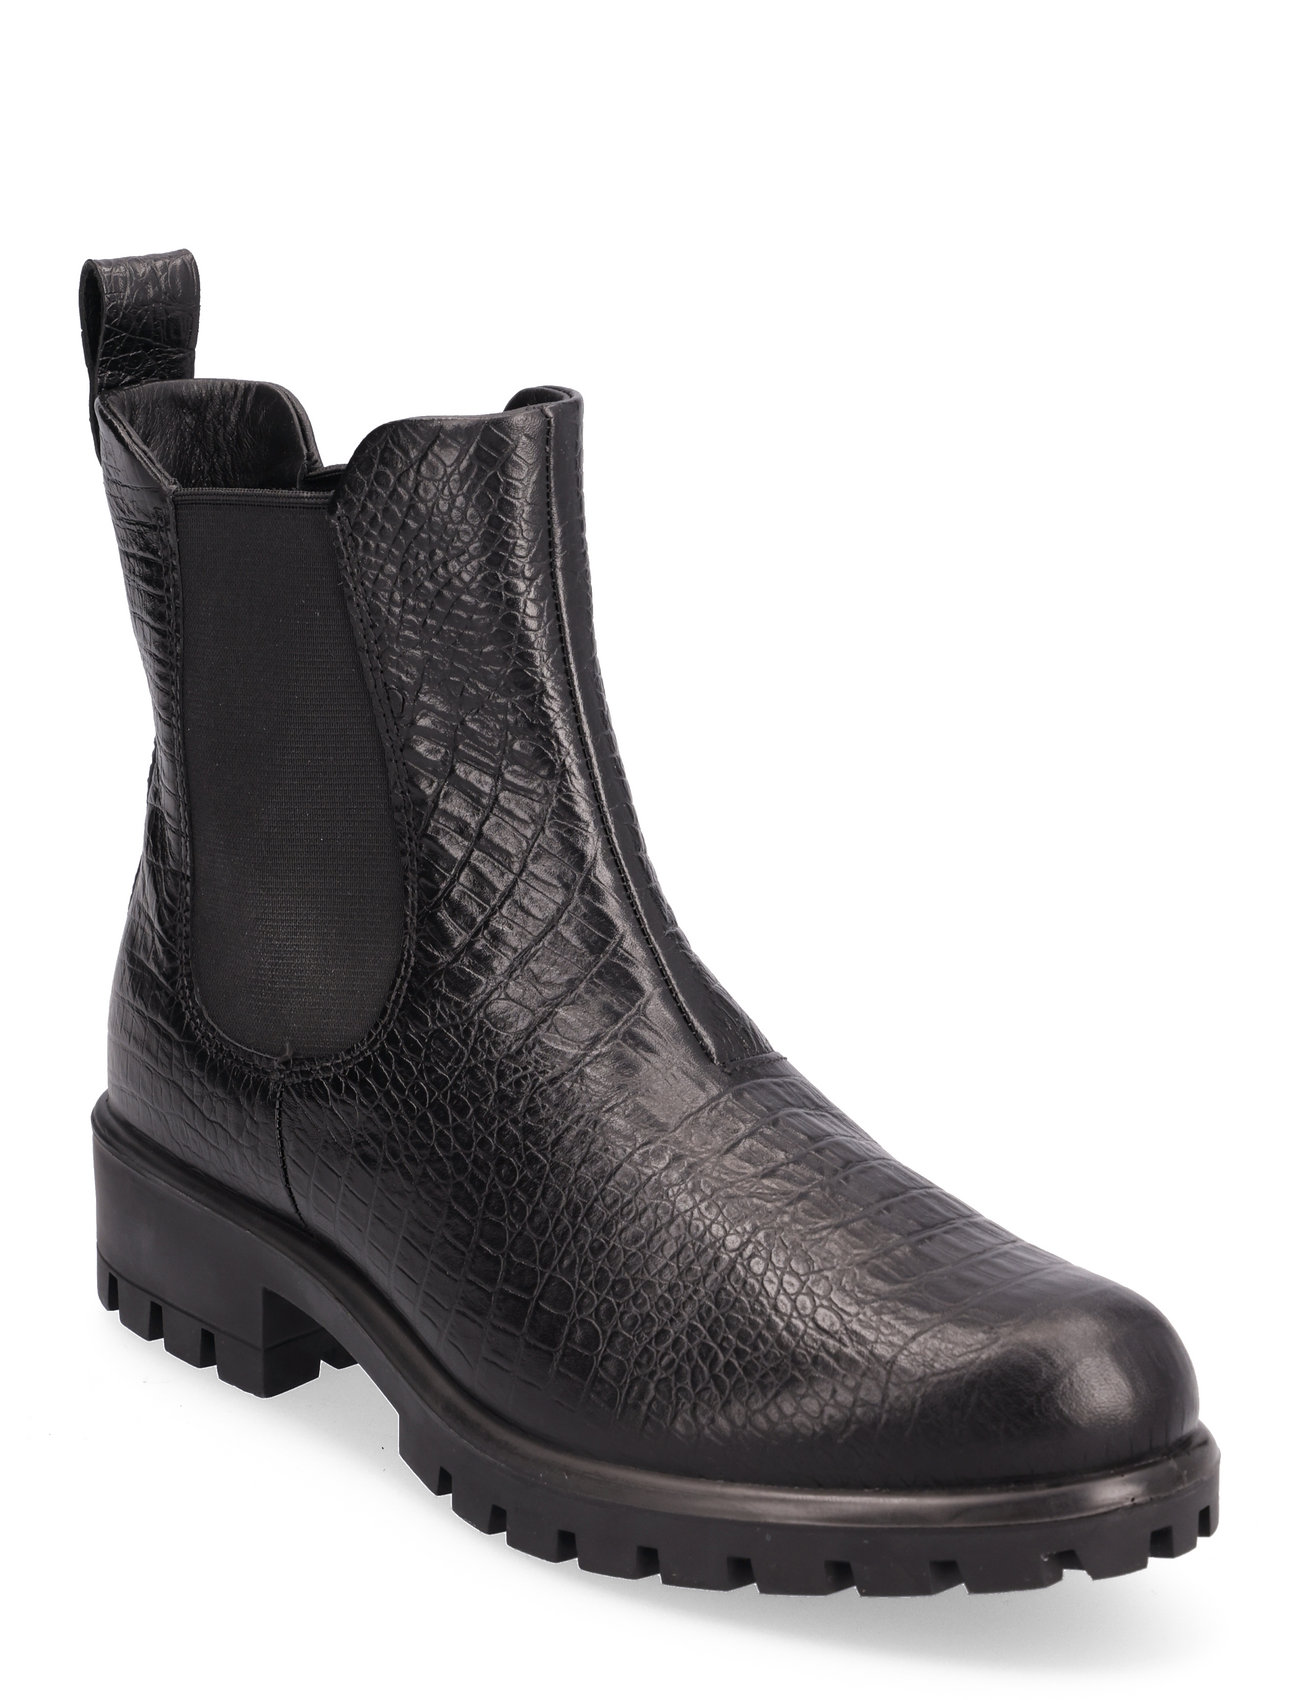 ECCO Modtray W - Heeled ankle boots - Boozt.com